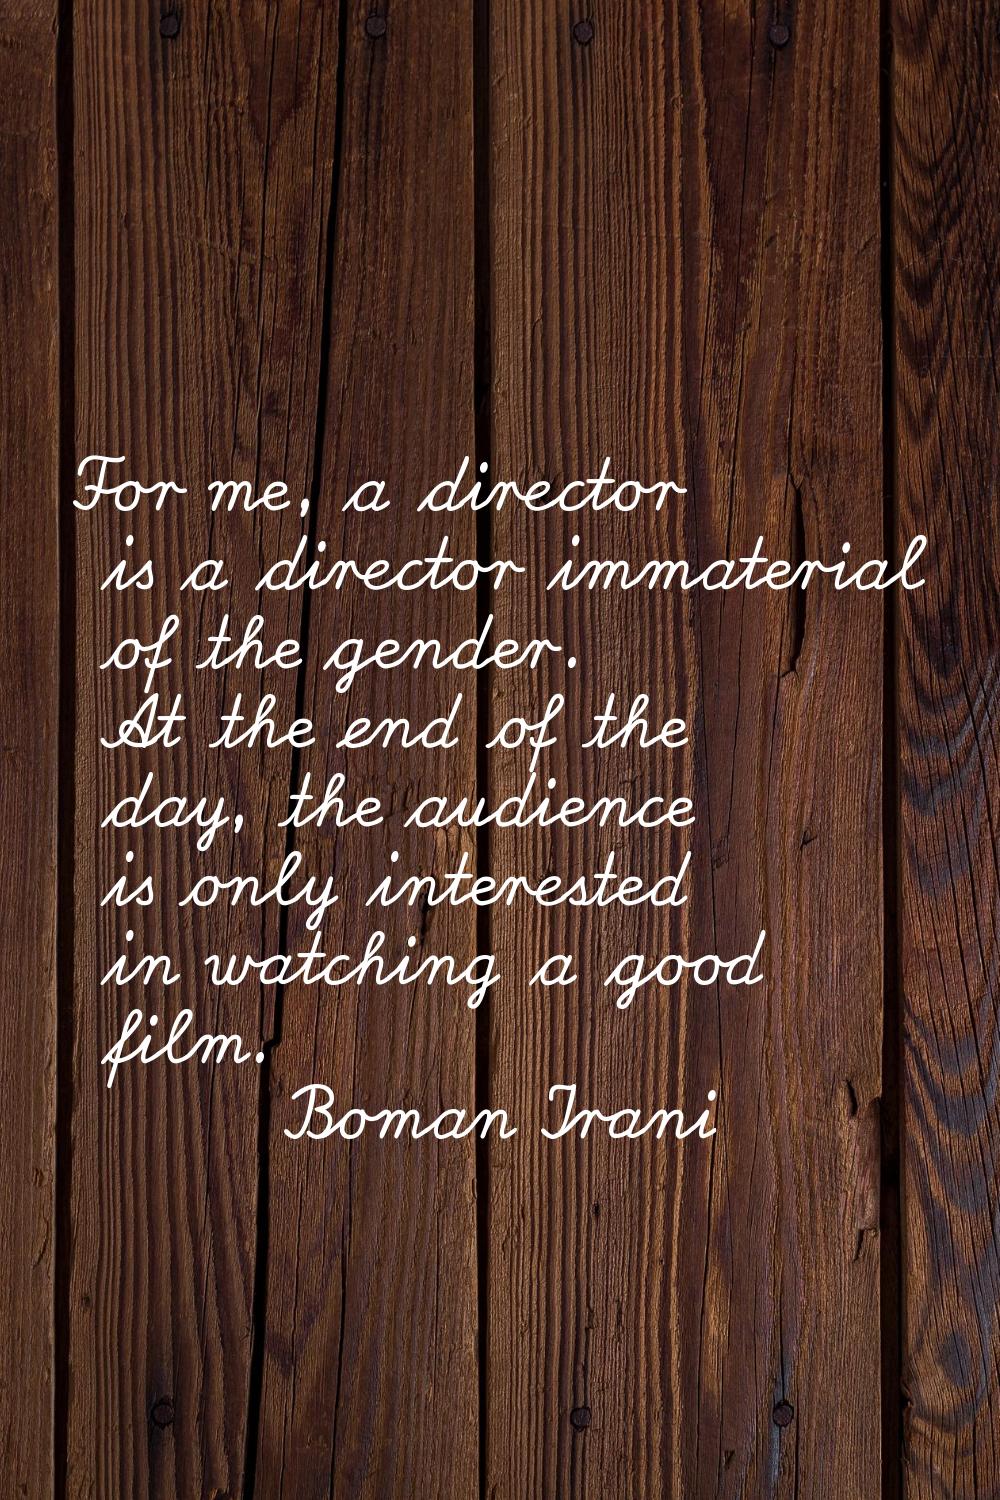 For me, a director is a director immaterial of the gender. At the end of the day, the audience is o